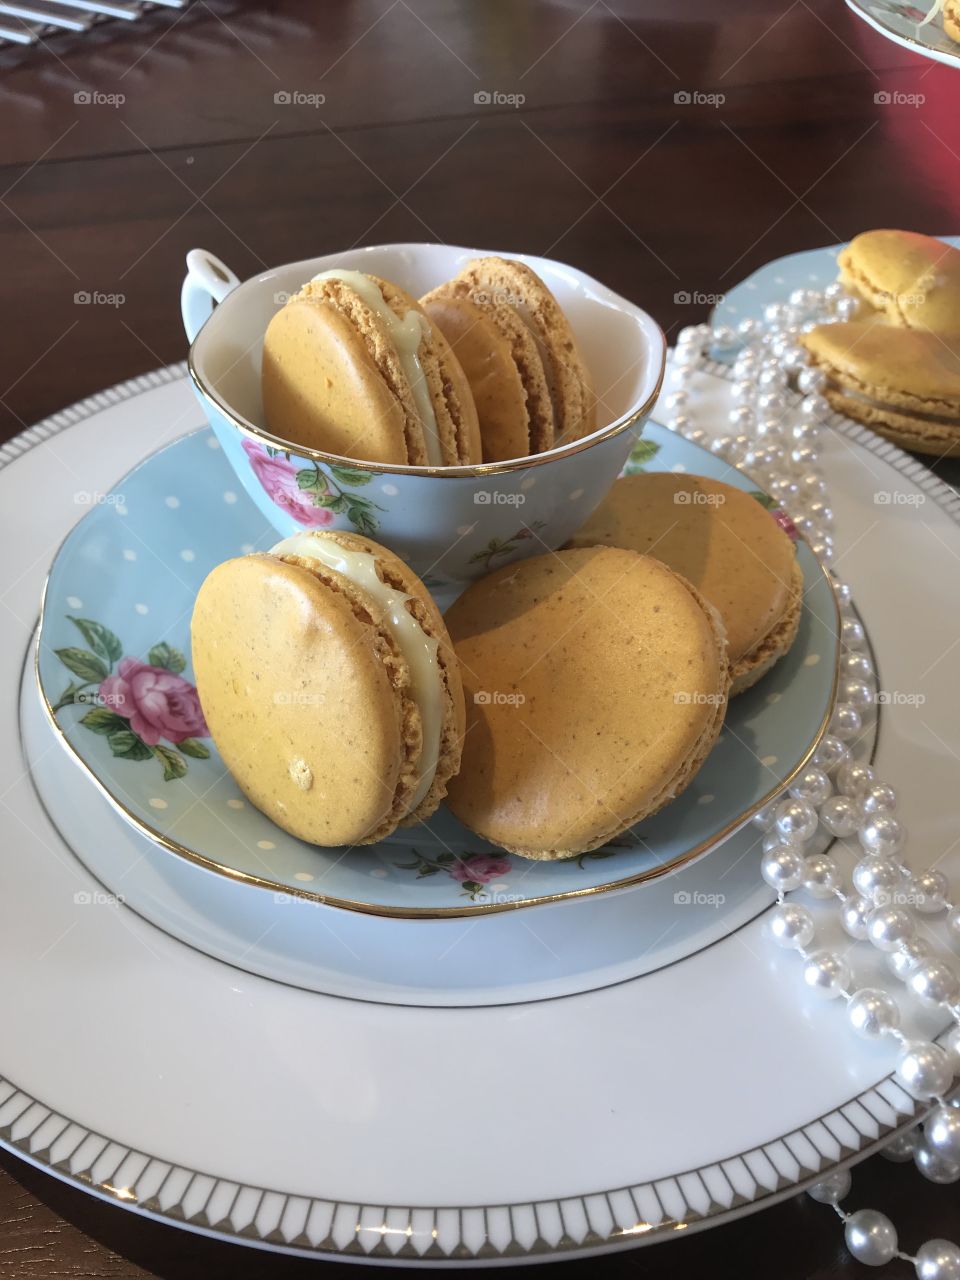 Passionfruit flavoured macaroons filled with white chocolate ganache